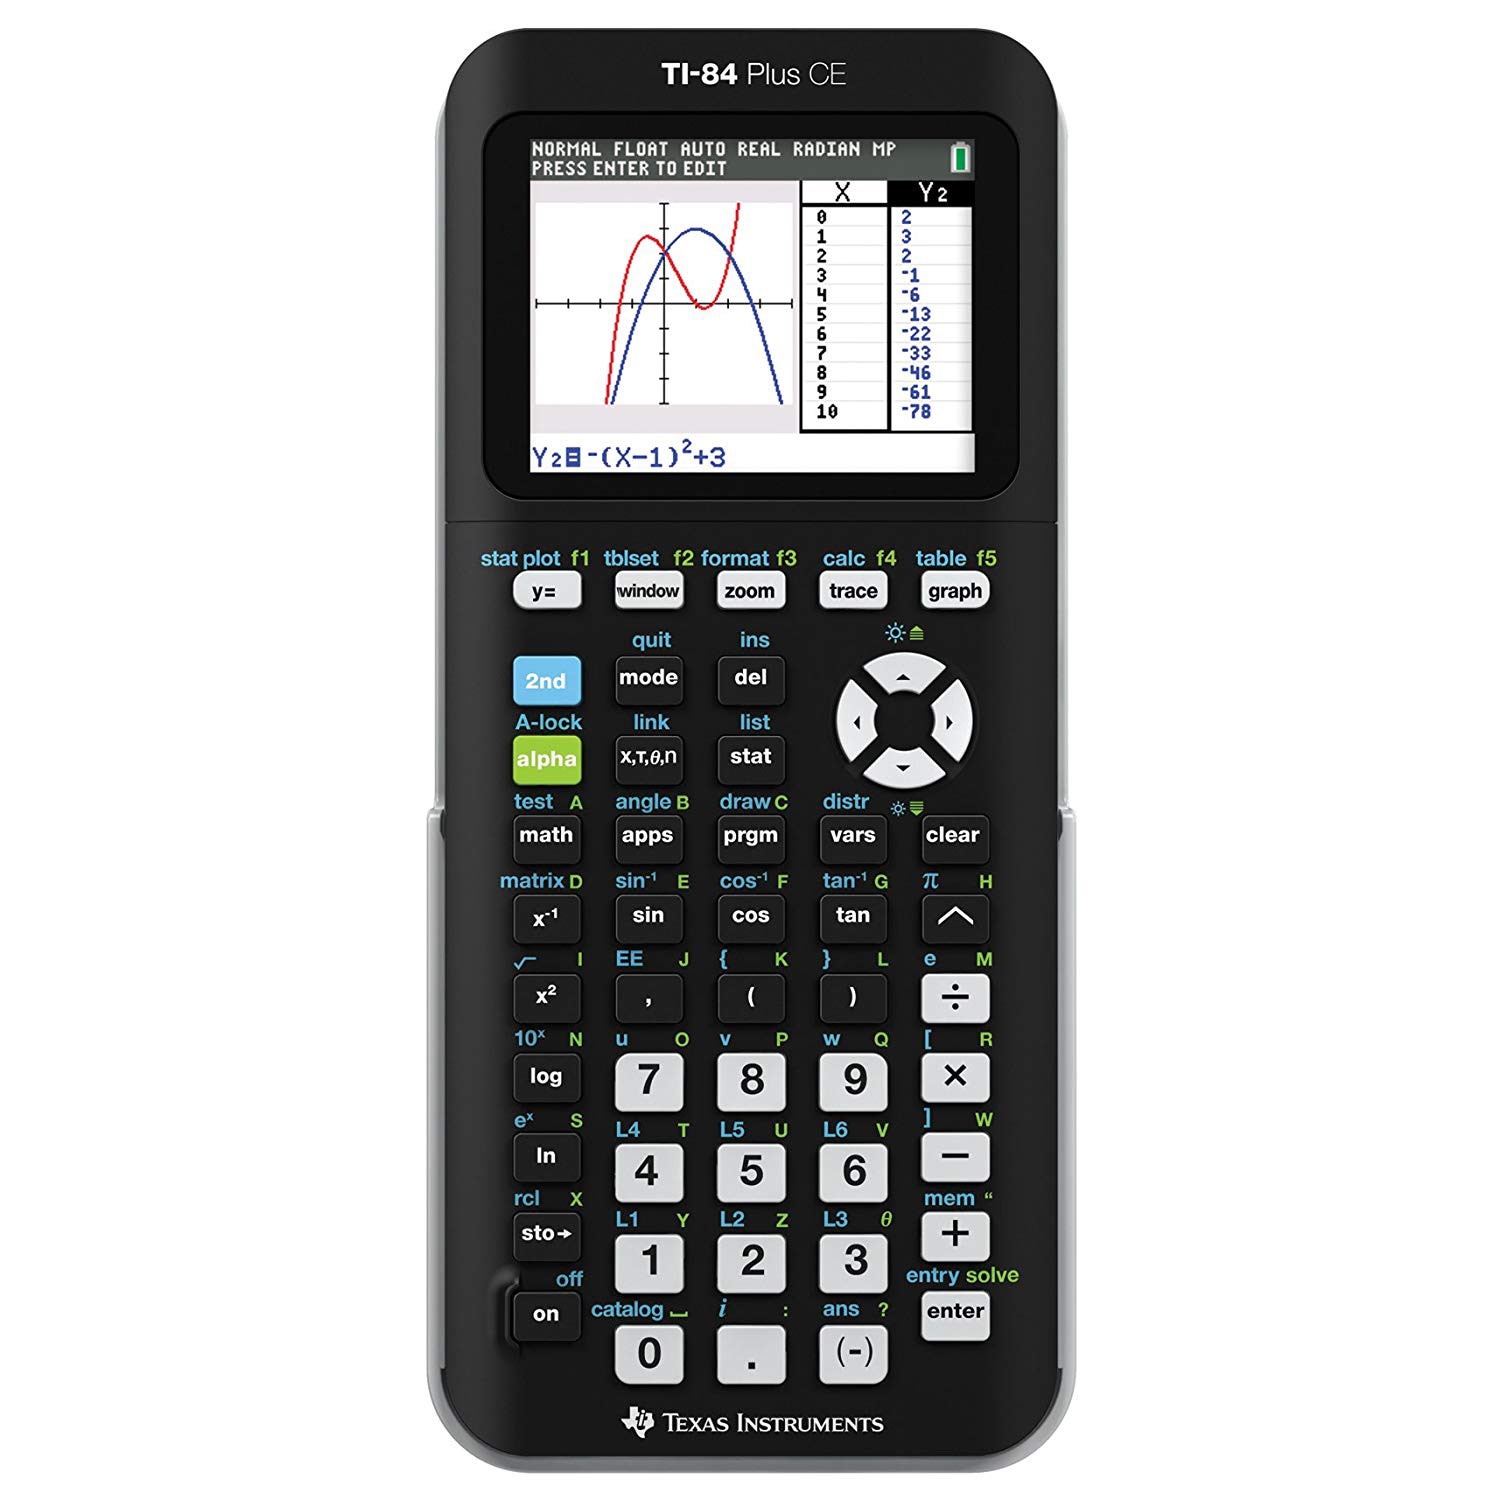 Texas Instruments TI-84 Plus CE Graphing Calculator in Black